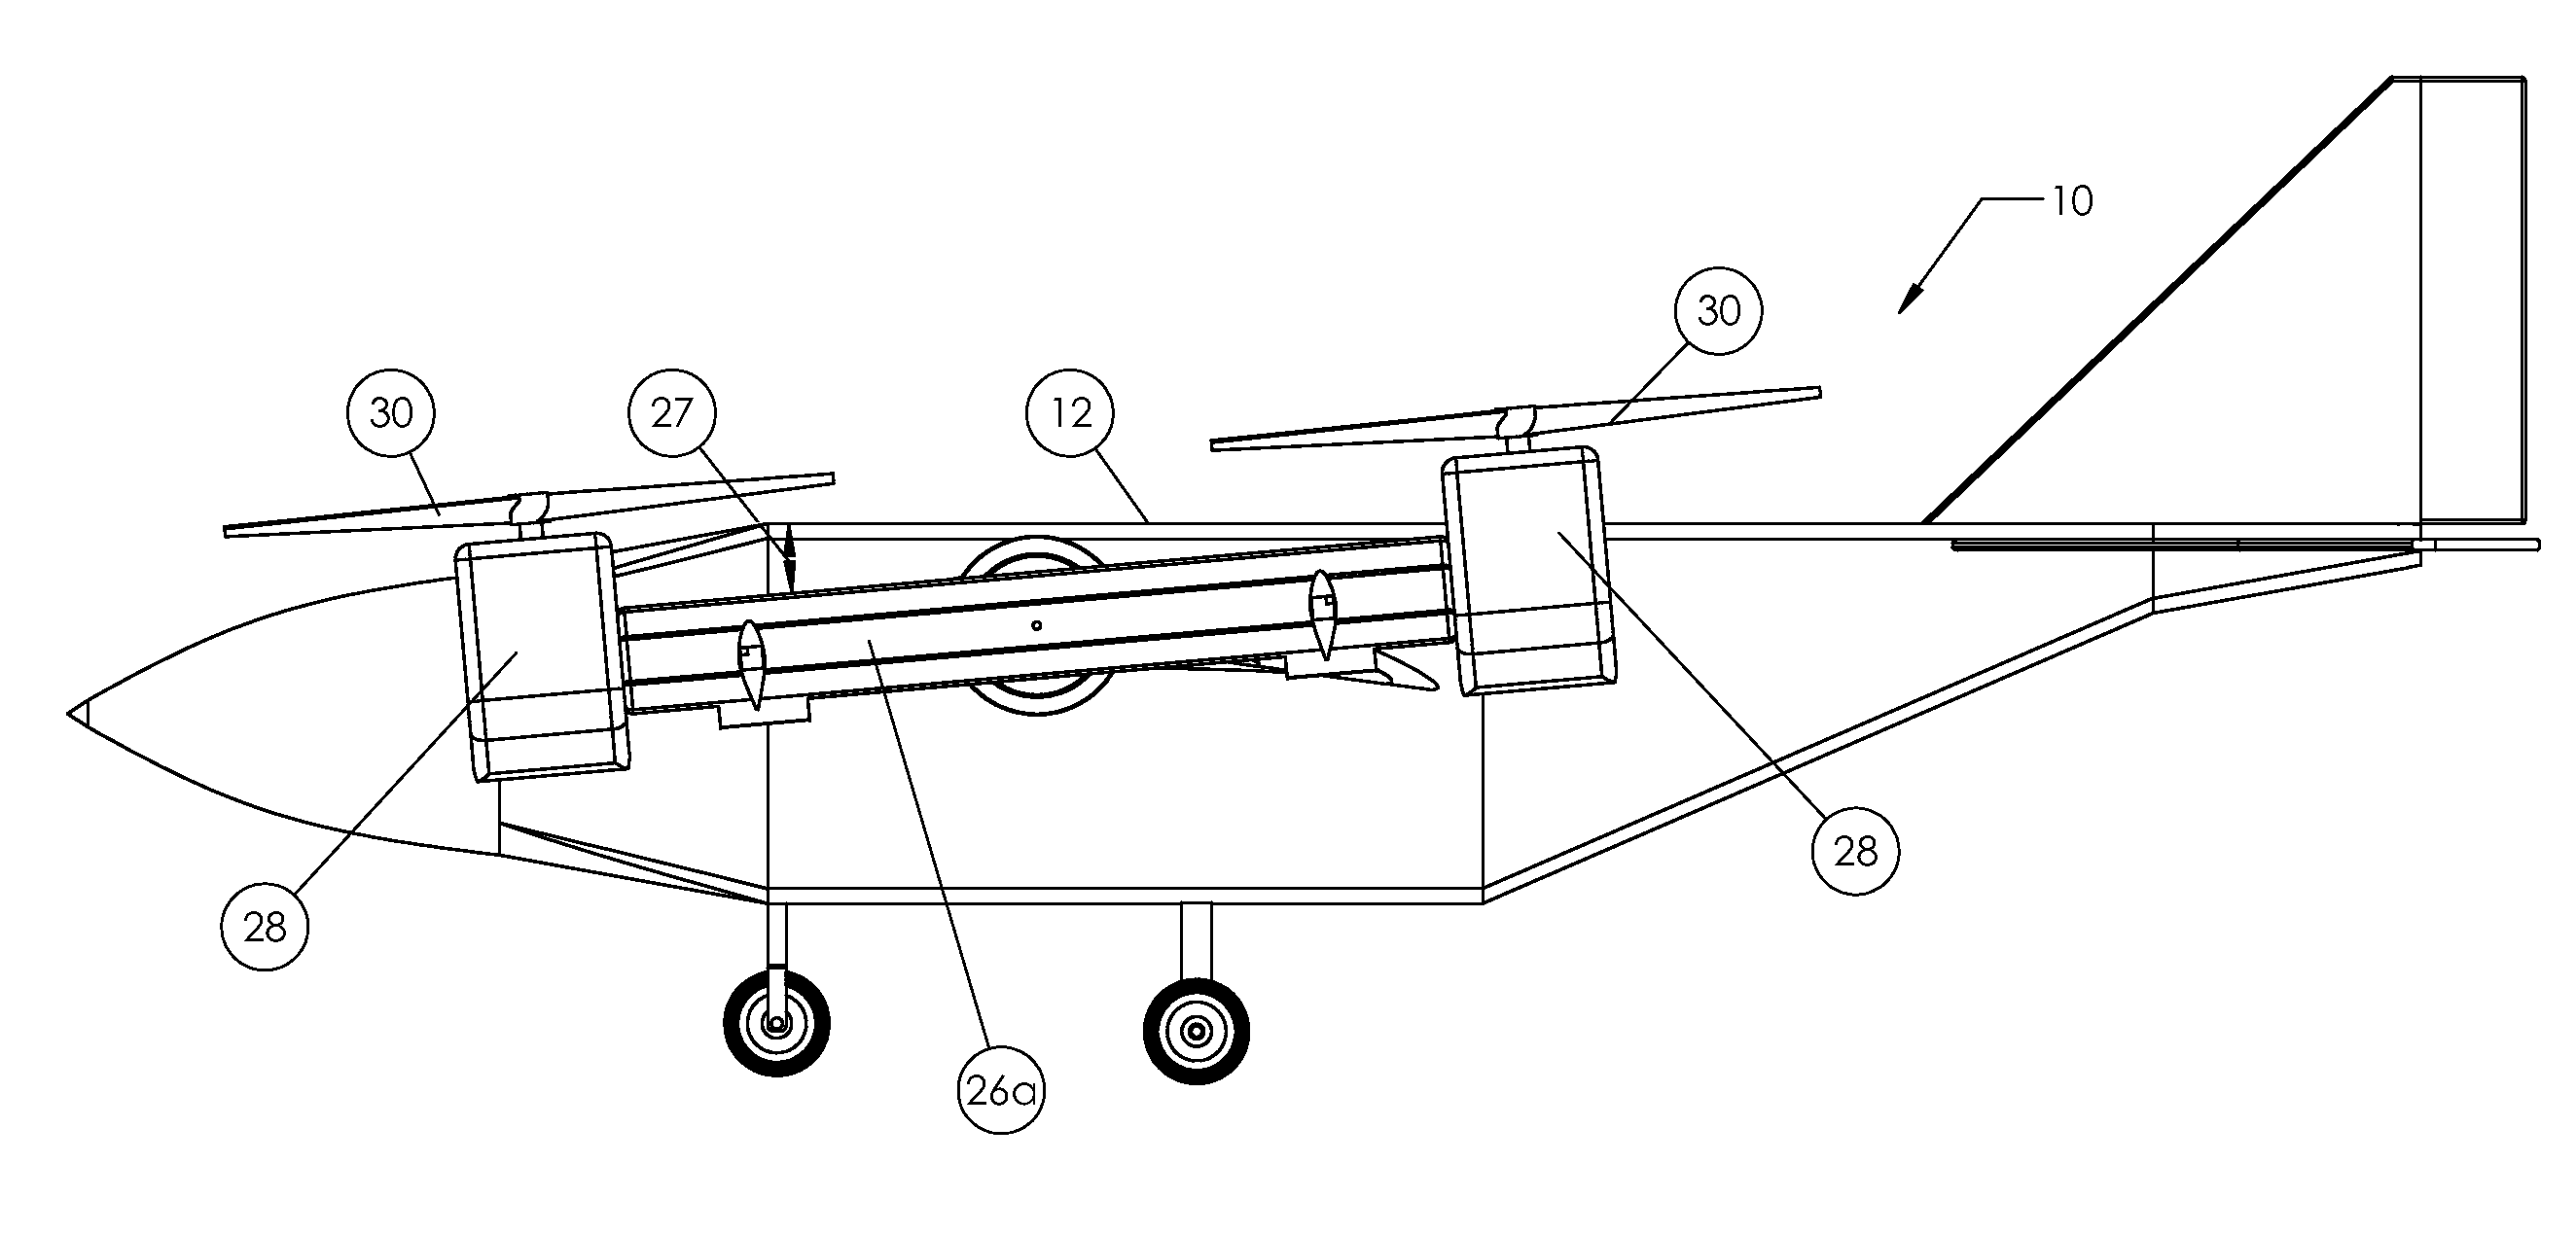 Aircraft with wings and movable propellers